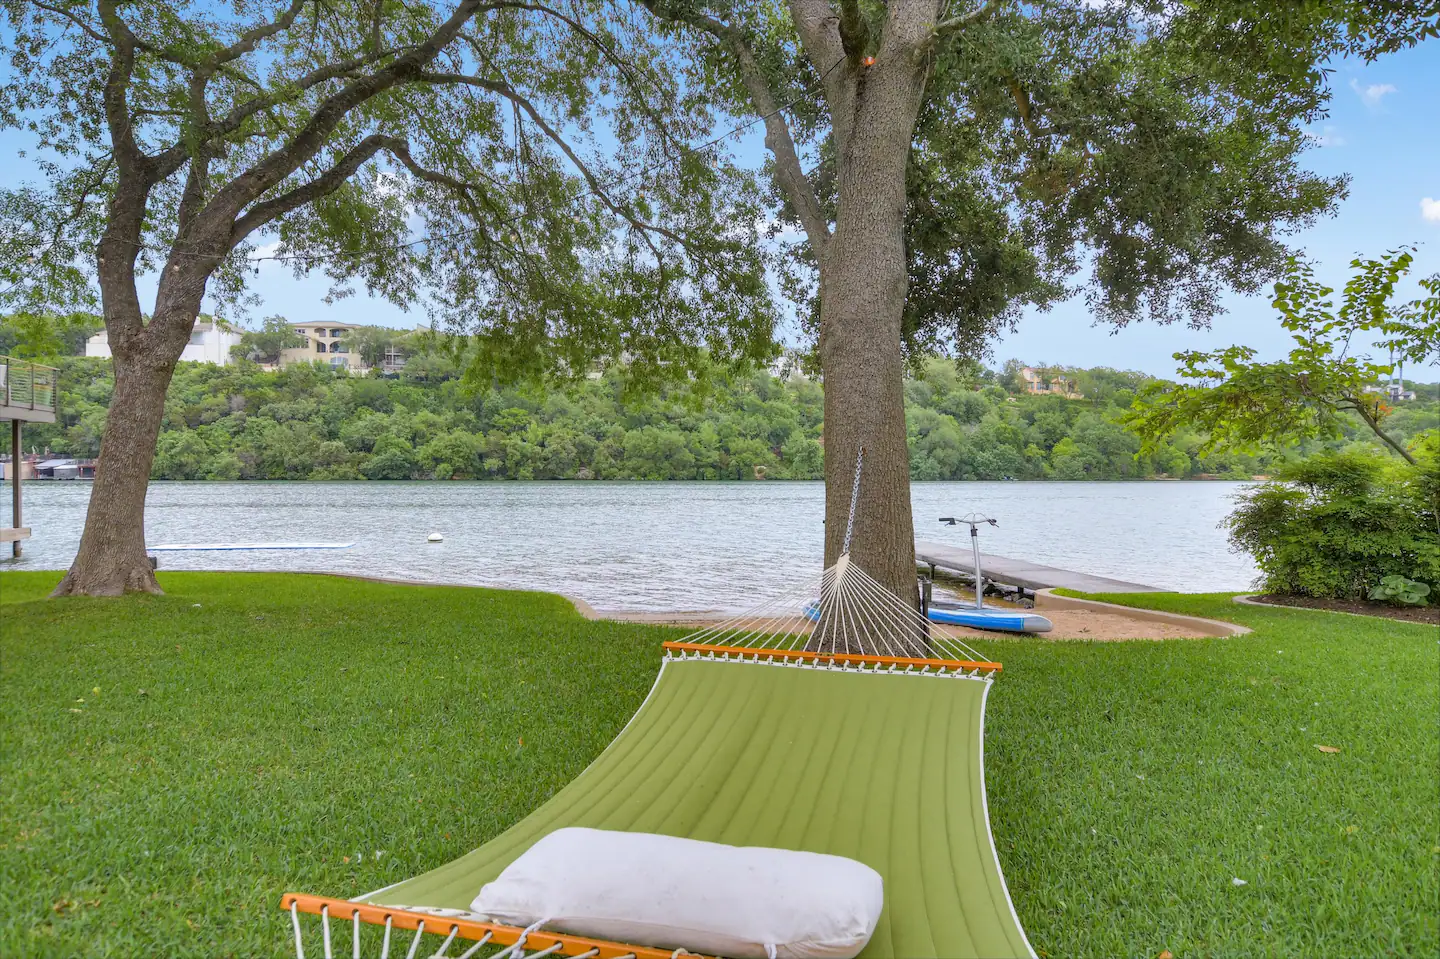 Lounge in the hammock and take in the breathtaking view.